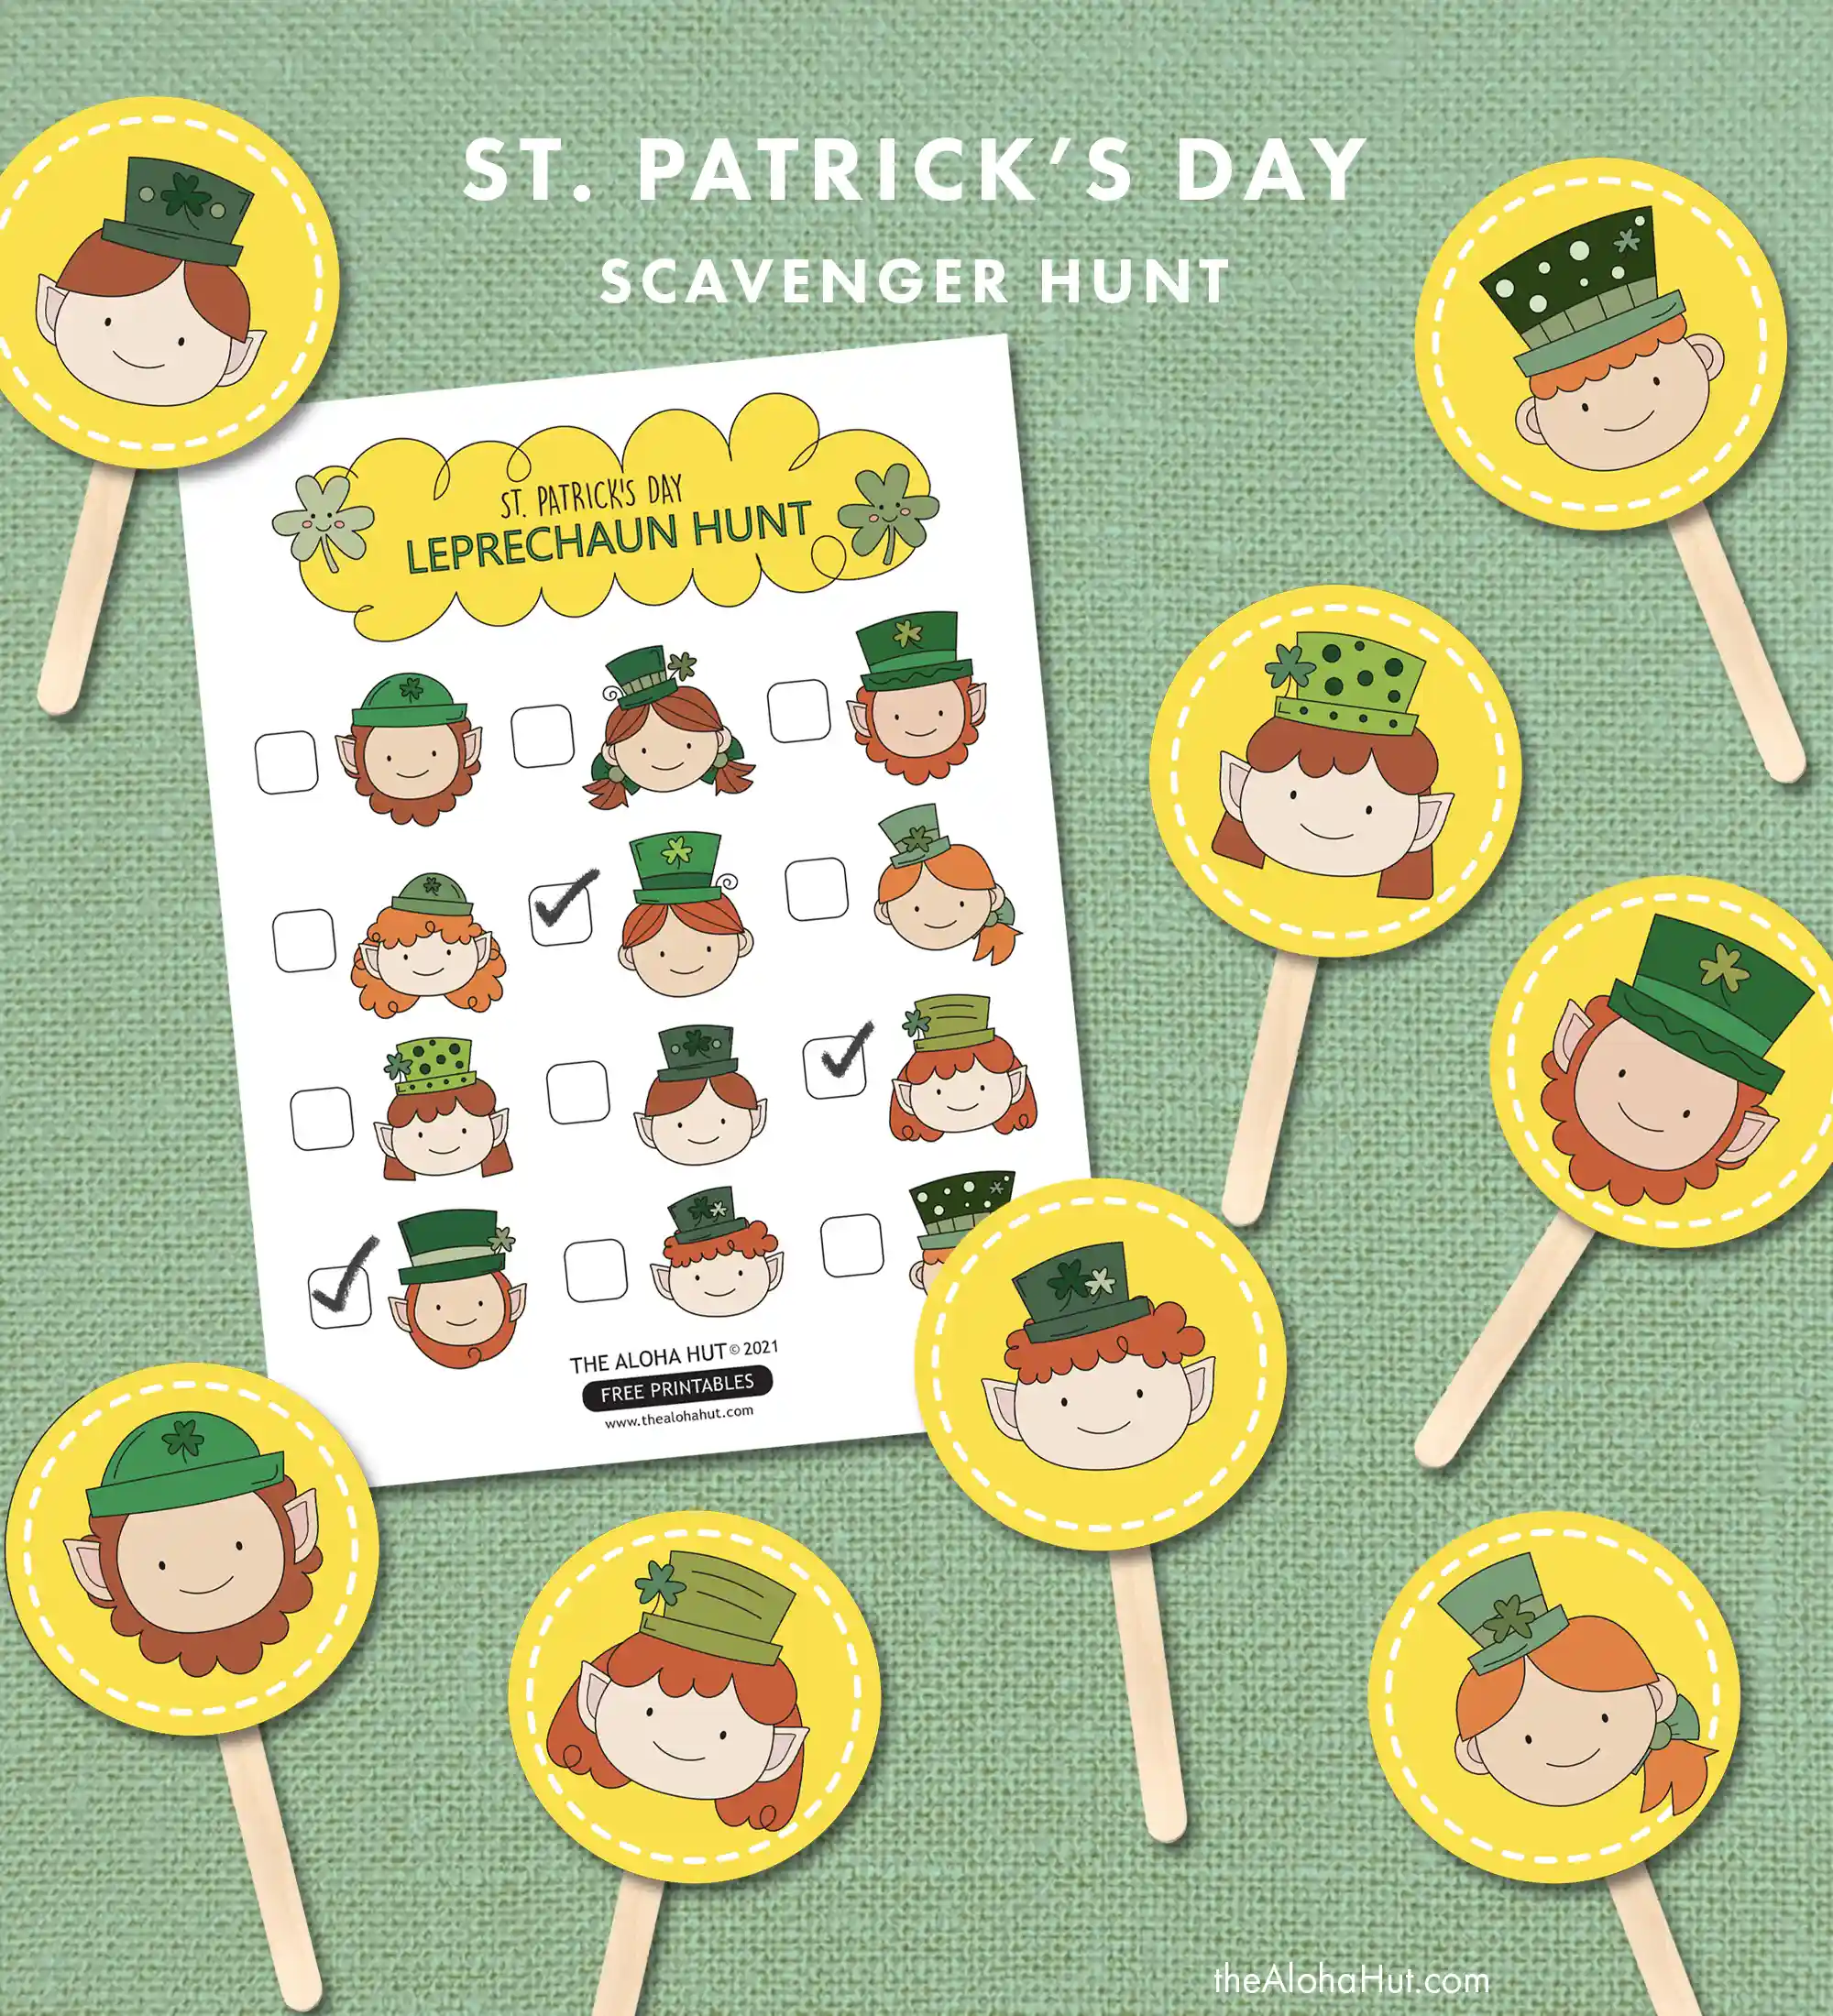 Printable St. Patrick's Day game to help you celebrate St. Patrick's Day and throw a magical St. Patrick's Day party! Download the printable Leprechaun Hunt game (similar to a scavenger hunt game) and hide the leprechauns around the yard for the kids to find. You can also play the leprechaun hunt game indoors.